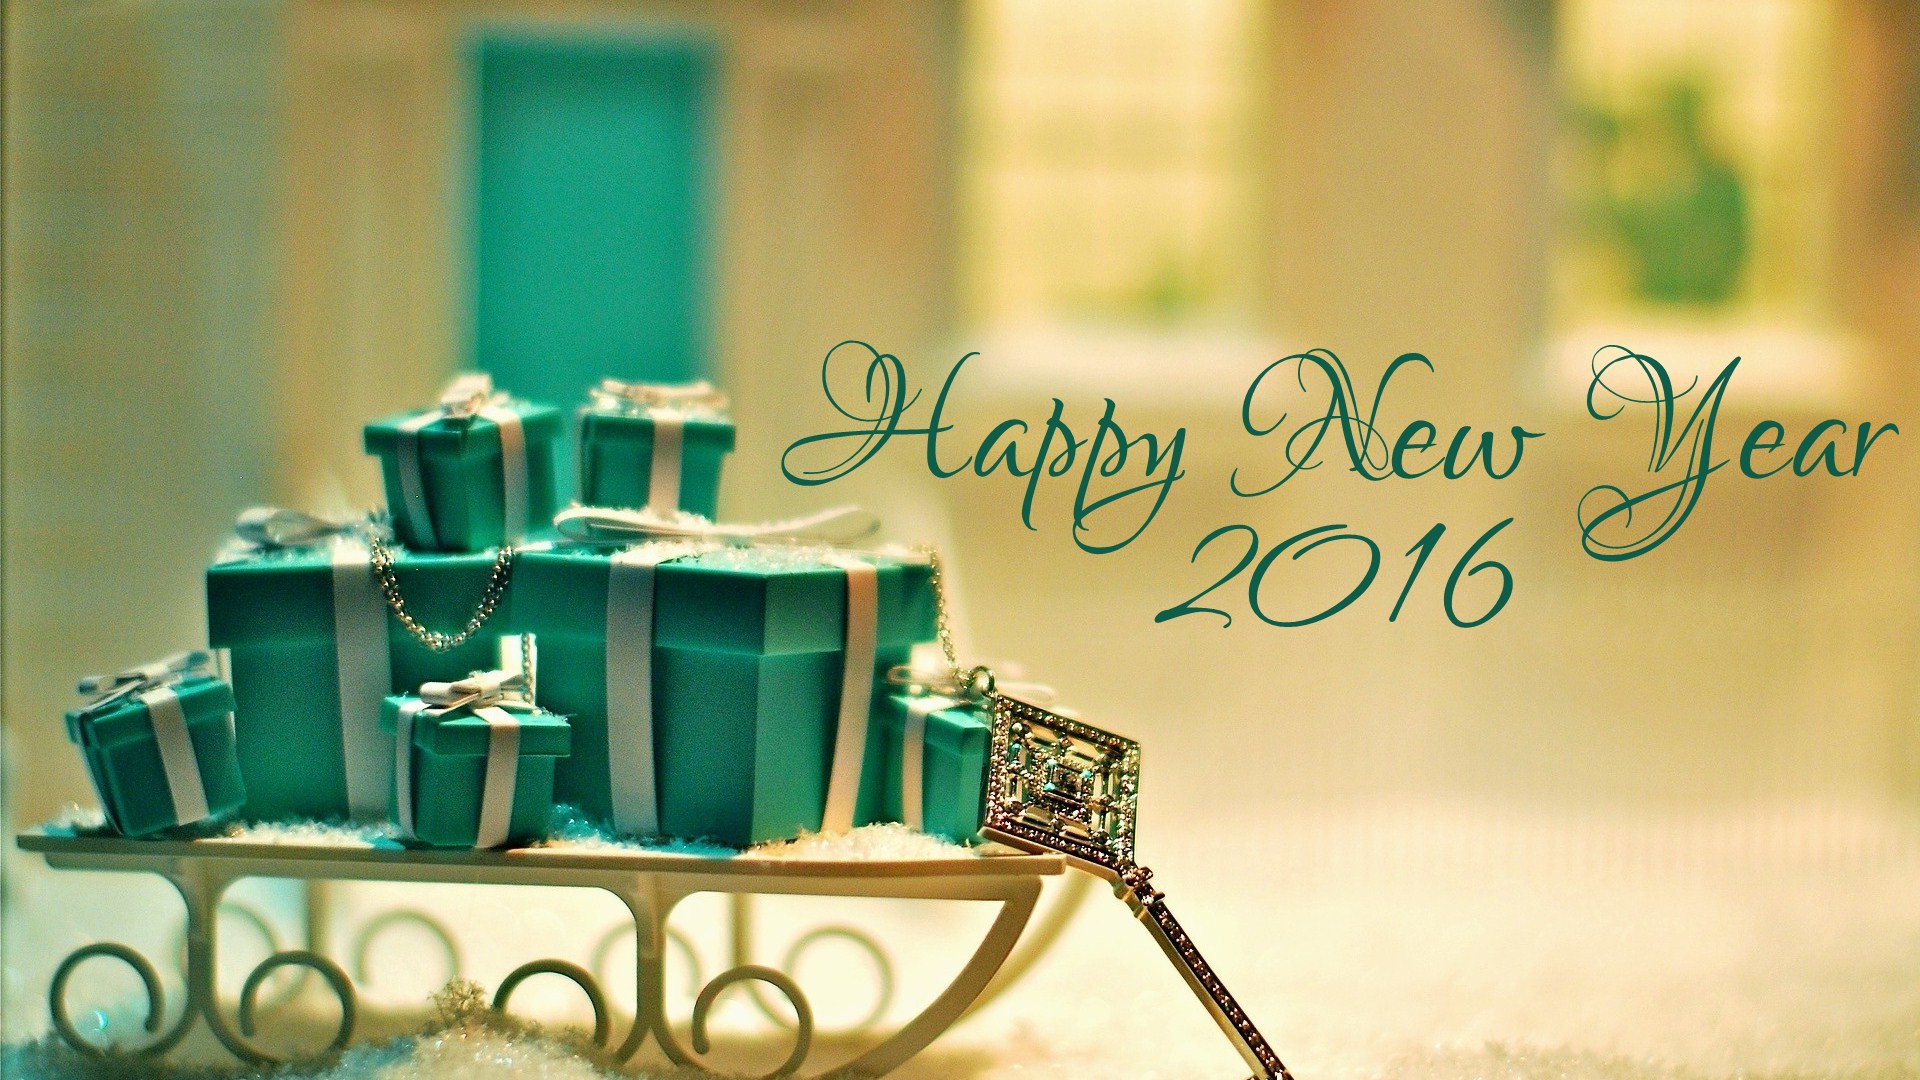 Free Download Happy New Year 2016 Wallpapers Pictures Images [1920x1080] For Your Desktop